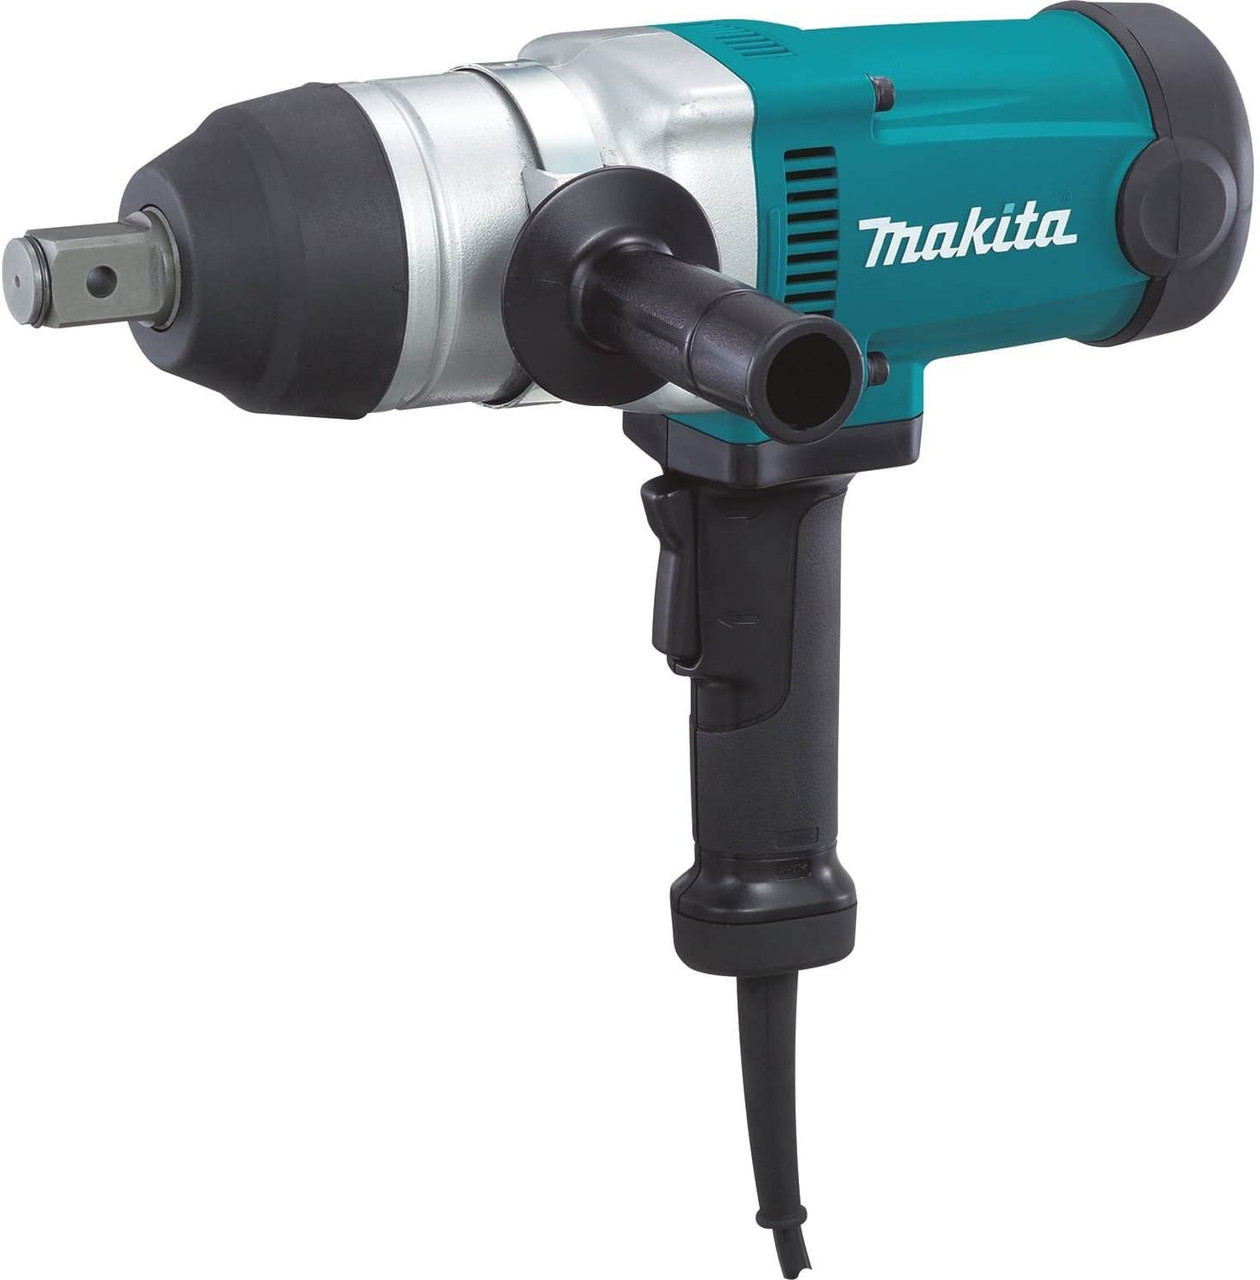 Corded, Impact Wrench, 738 ft-lb, 1,500 Impacts per Minute